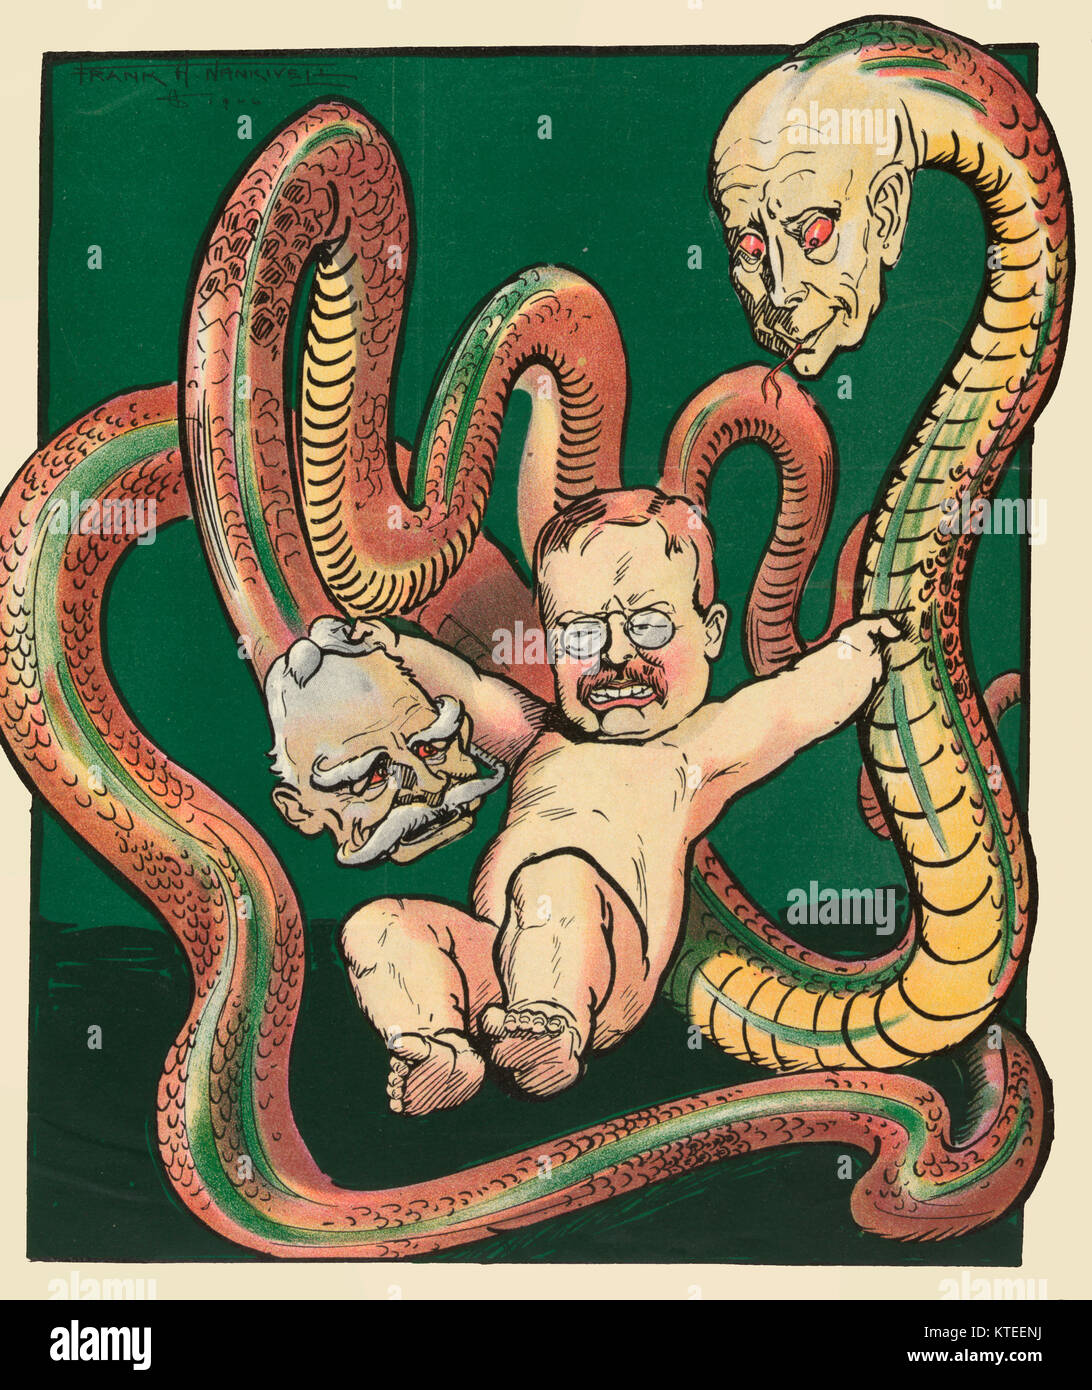 Illustration shows Theodore Roosevelt as the infant Hercules fighting large snakes with the heads of Nelson W. Aldrich and John D. Rockefeller. Political Cartoon, 1906 Stock Photo